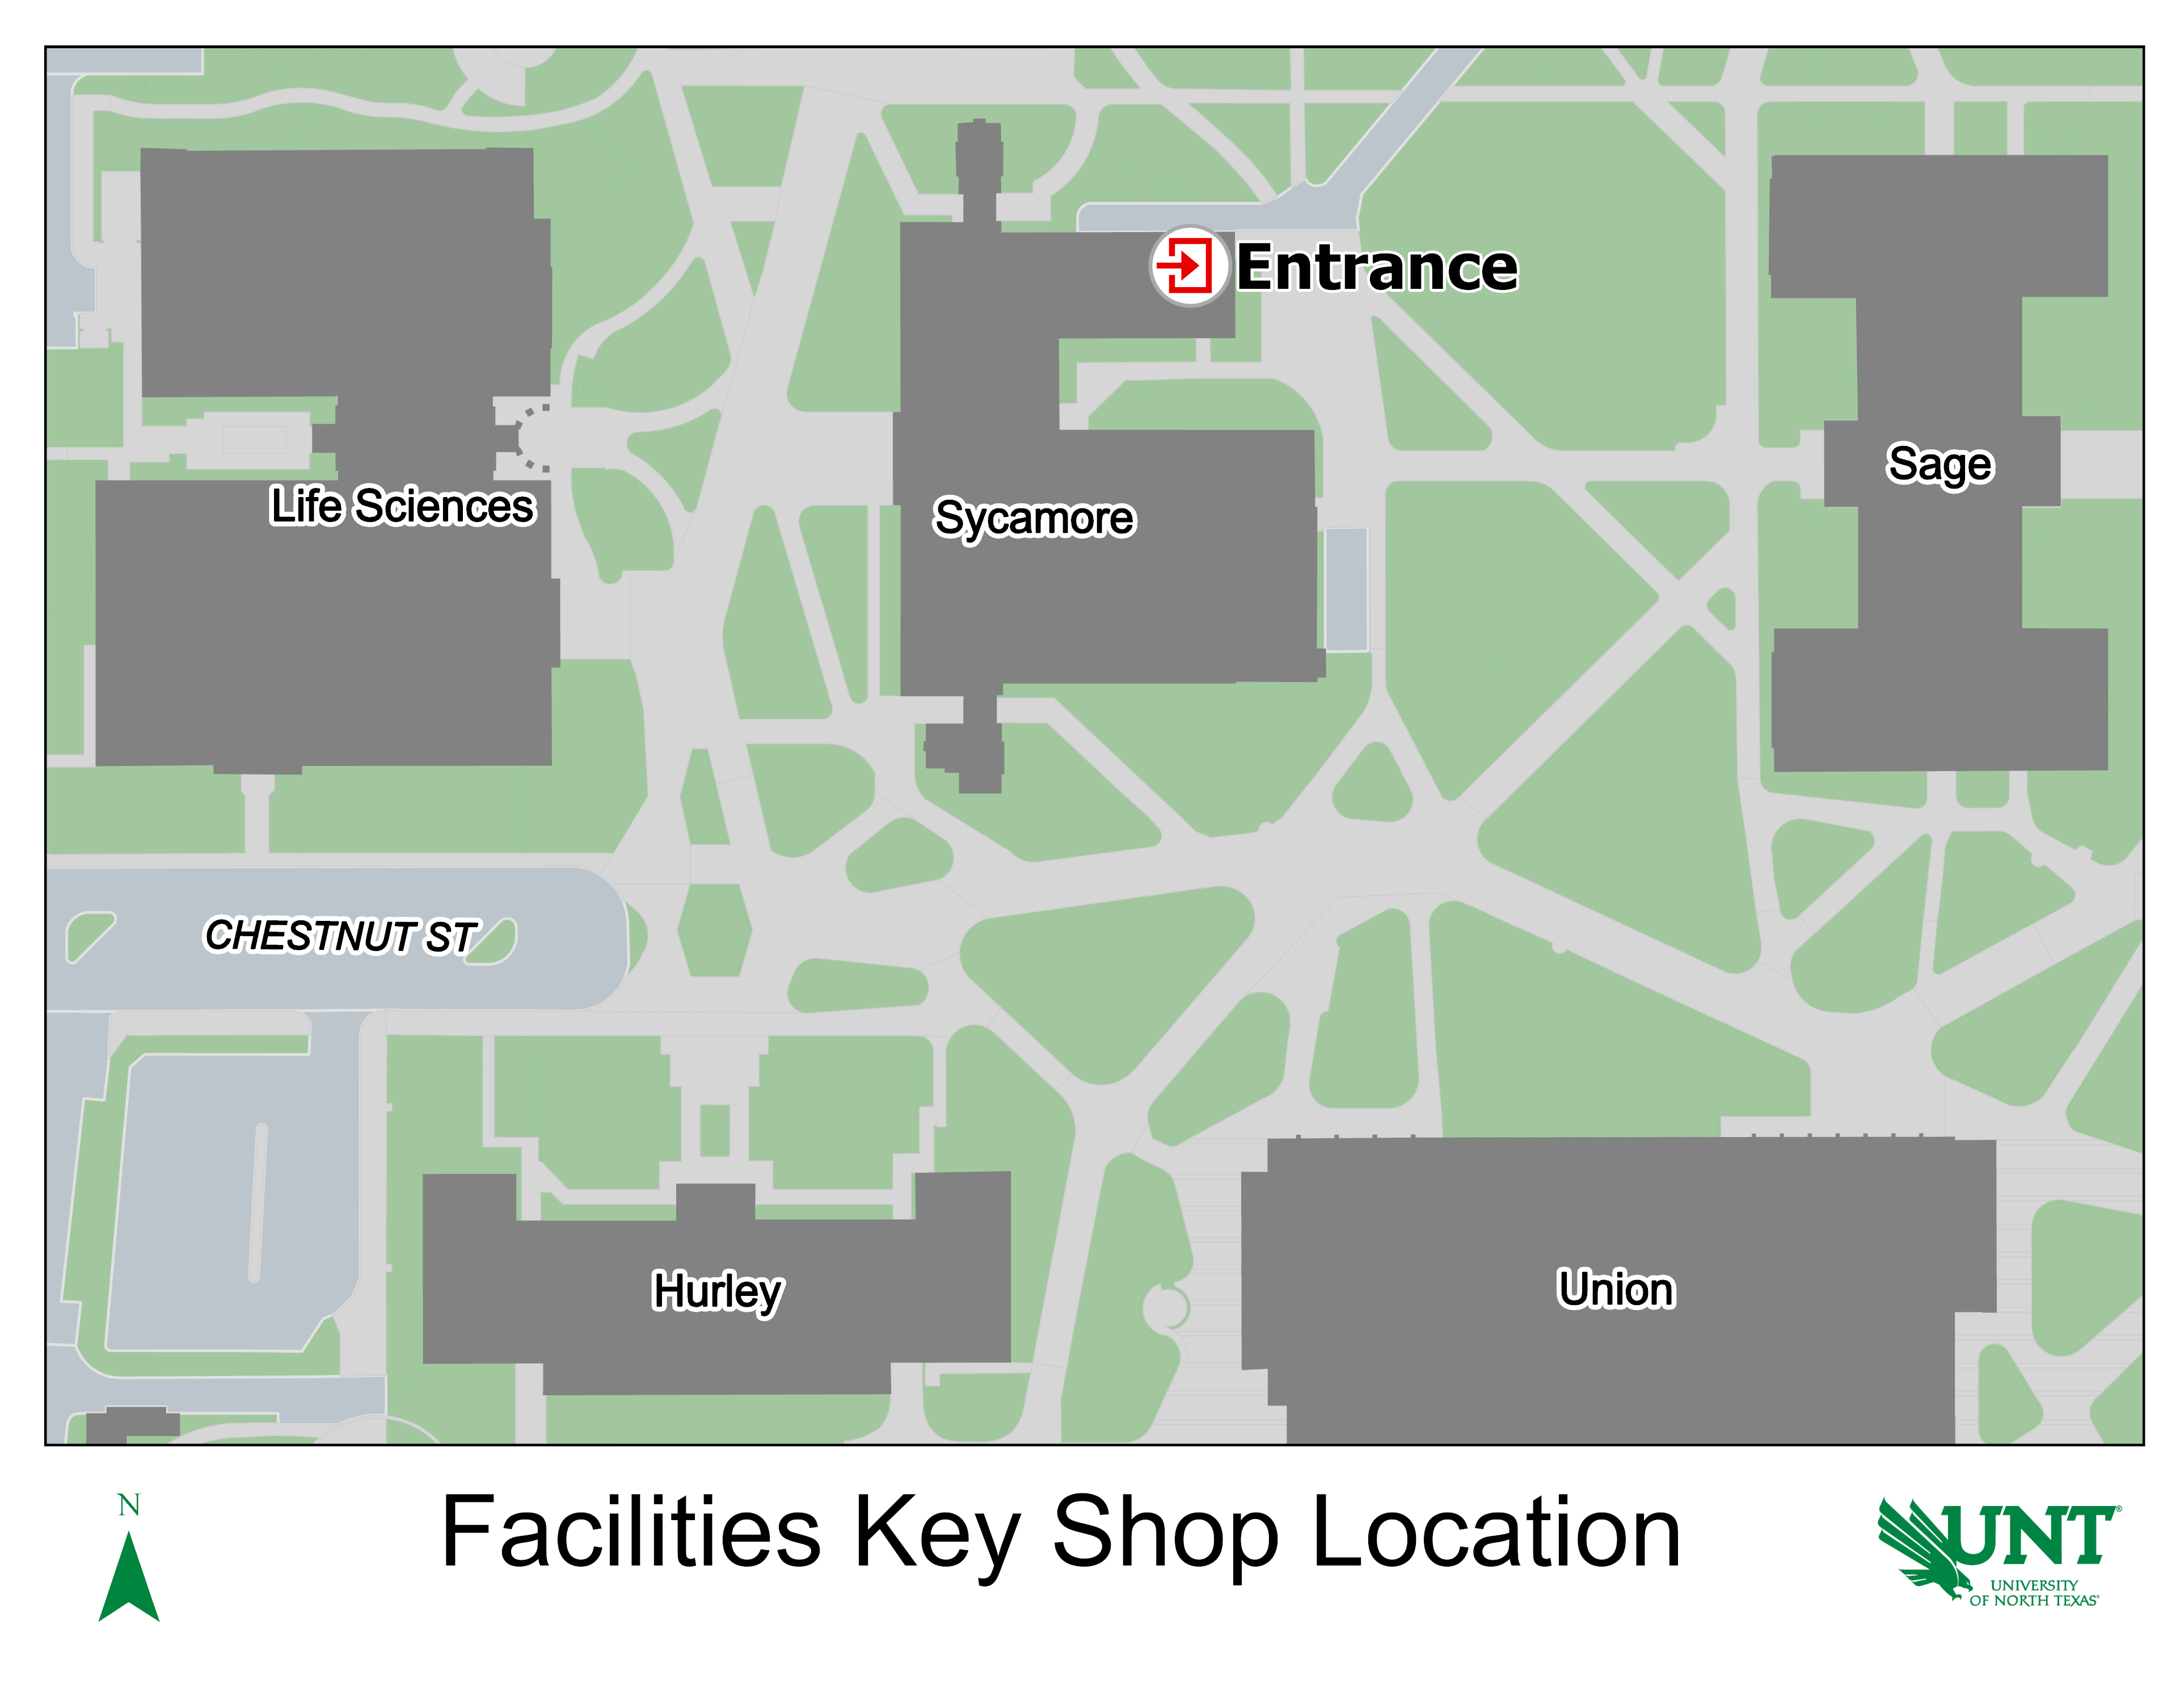 Key shop location on the north side of Sycamore Hall